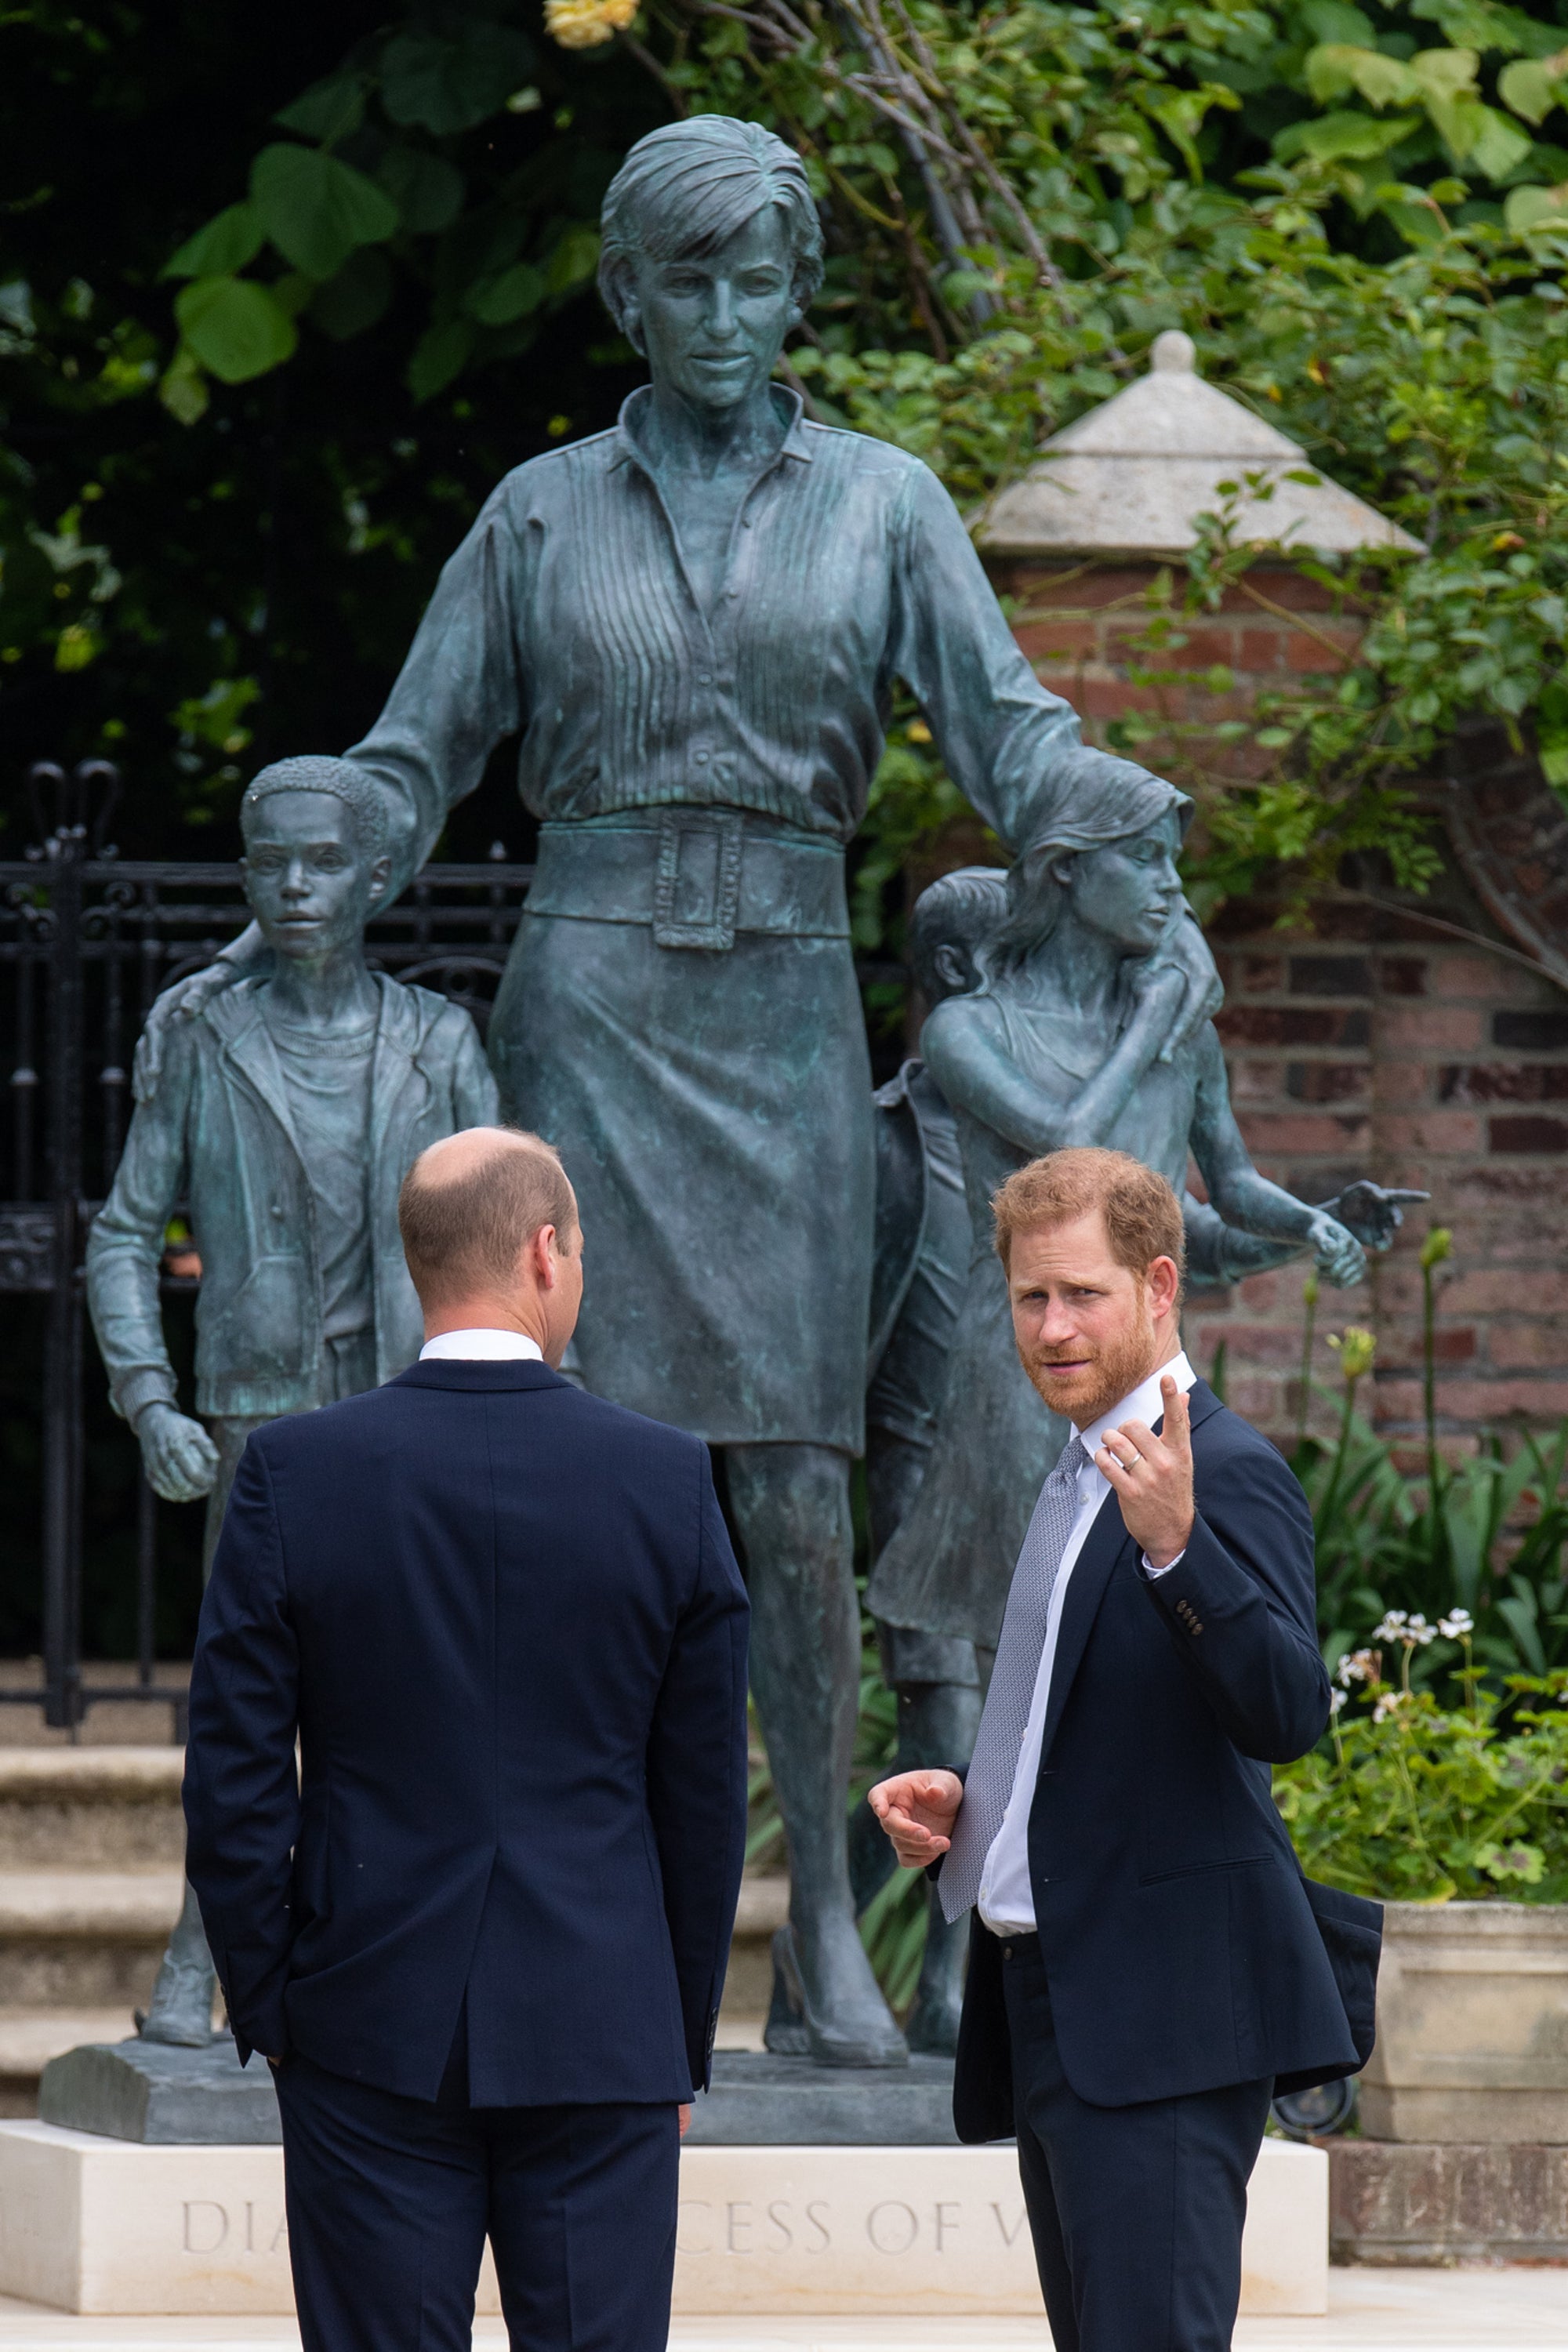 The Duke of Cambridge and Duke of Sussex during the unveiling on what would have been Diana’s 60th birthday (Dominic Lipinski/PA)